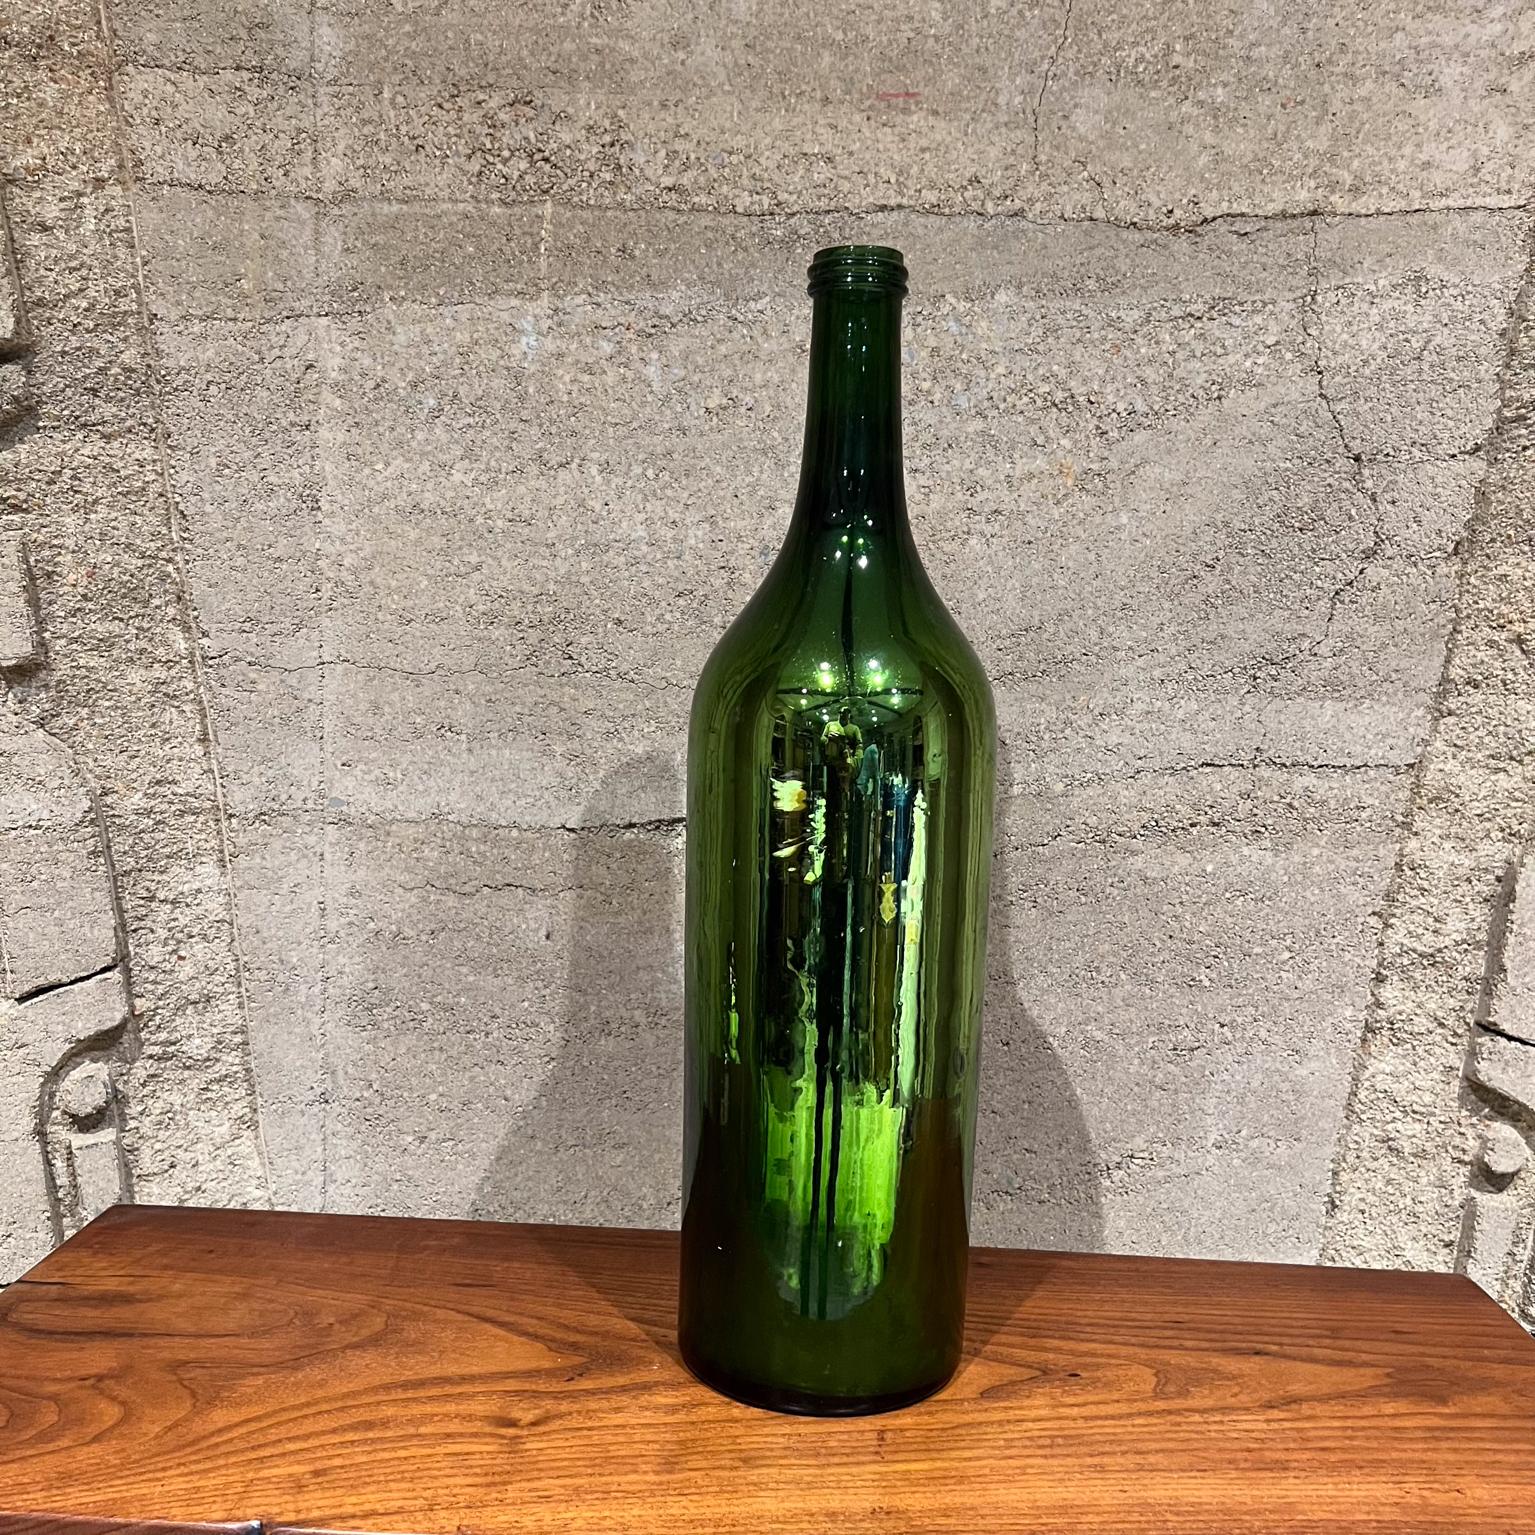 
Vintage Green Mercury Glass Bottle
21.25 h x 5.63 diameter
Preowned unrestored vintage condition
No label
Refer to images provided.